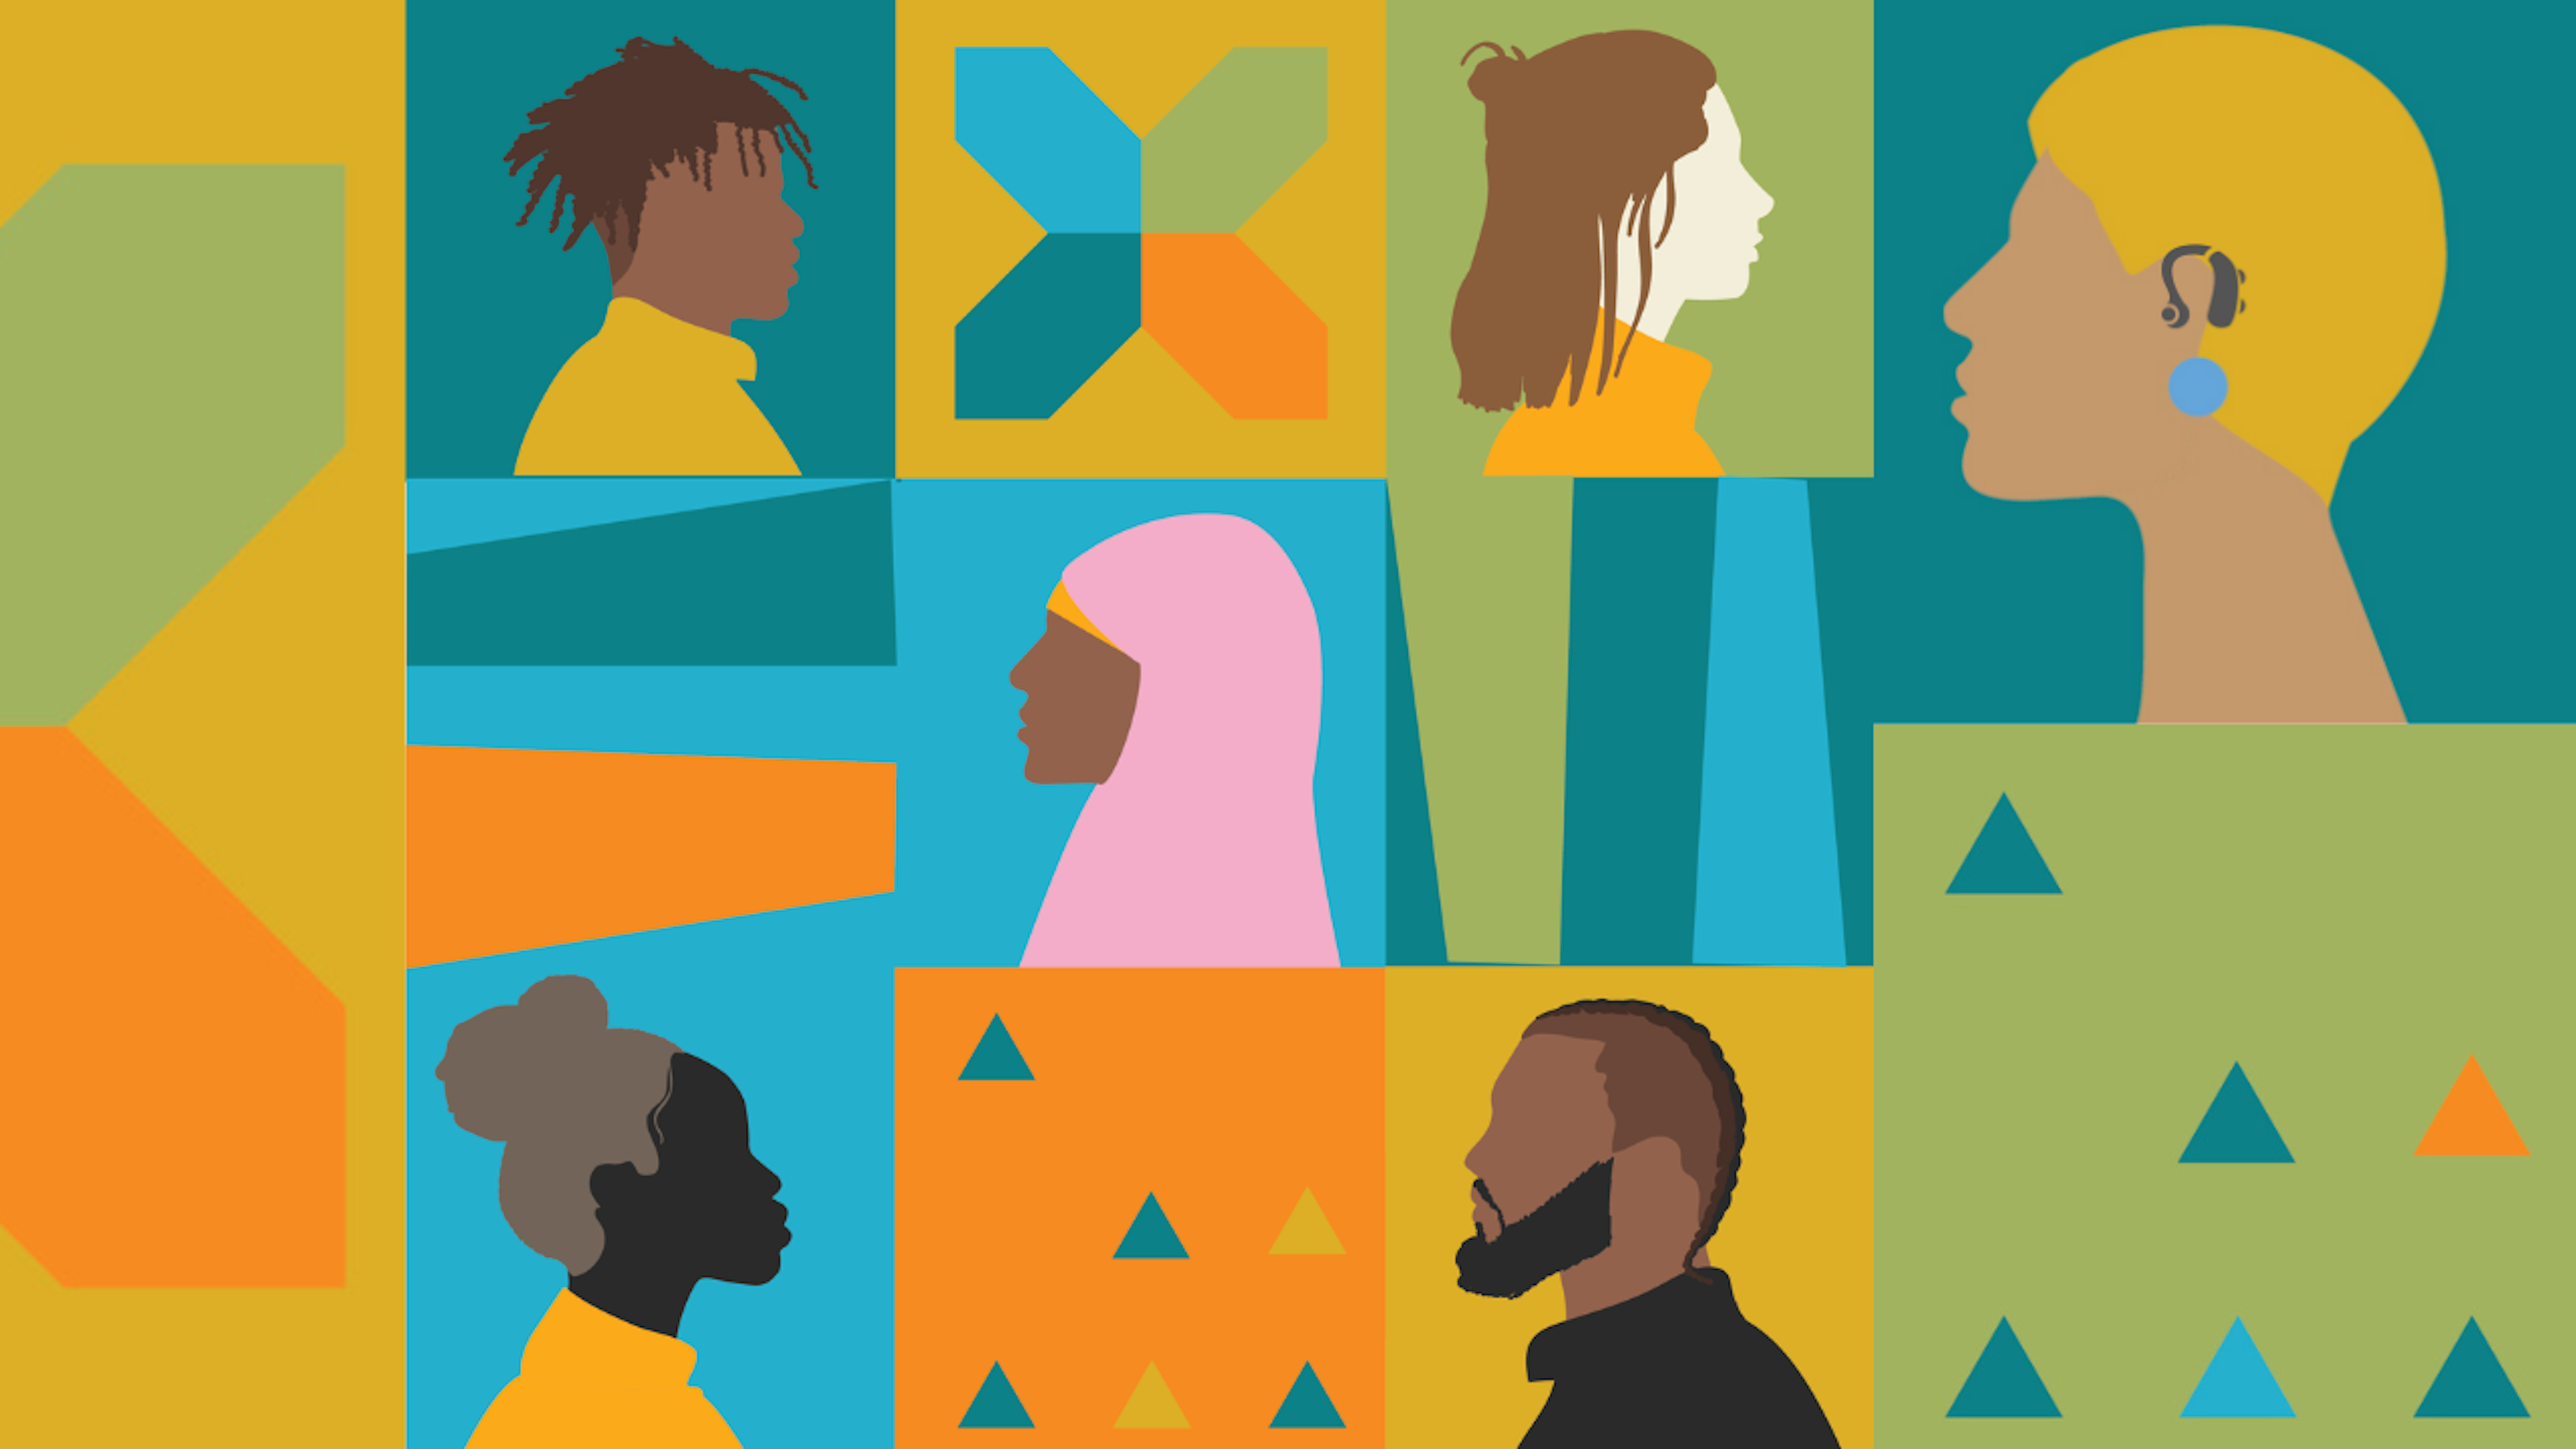 Quilt like image with colorful blocks with geometric shapes and profiles of people in the BIPOC community.